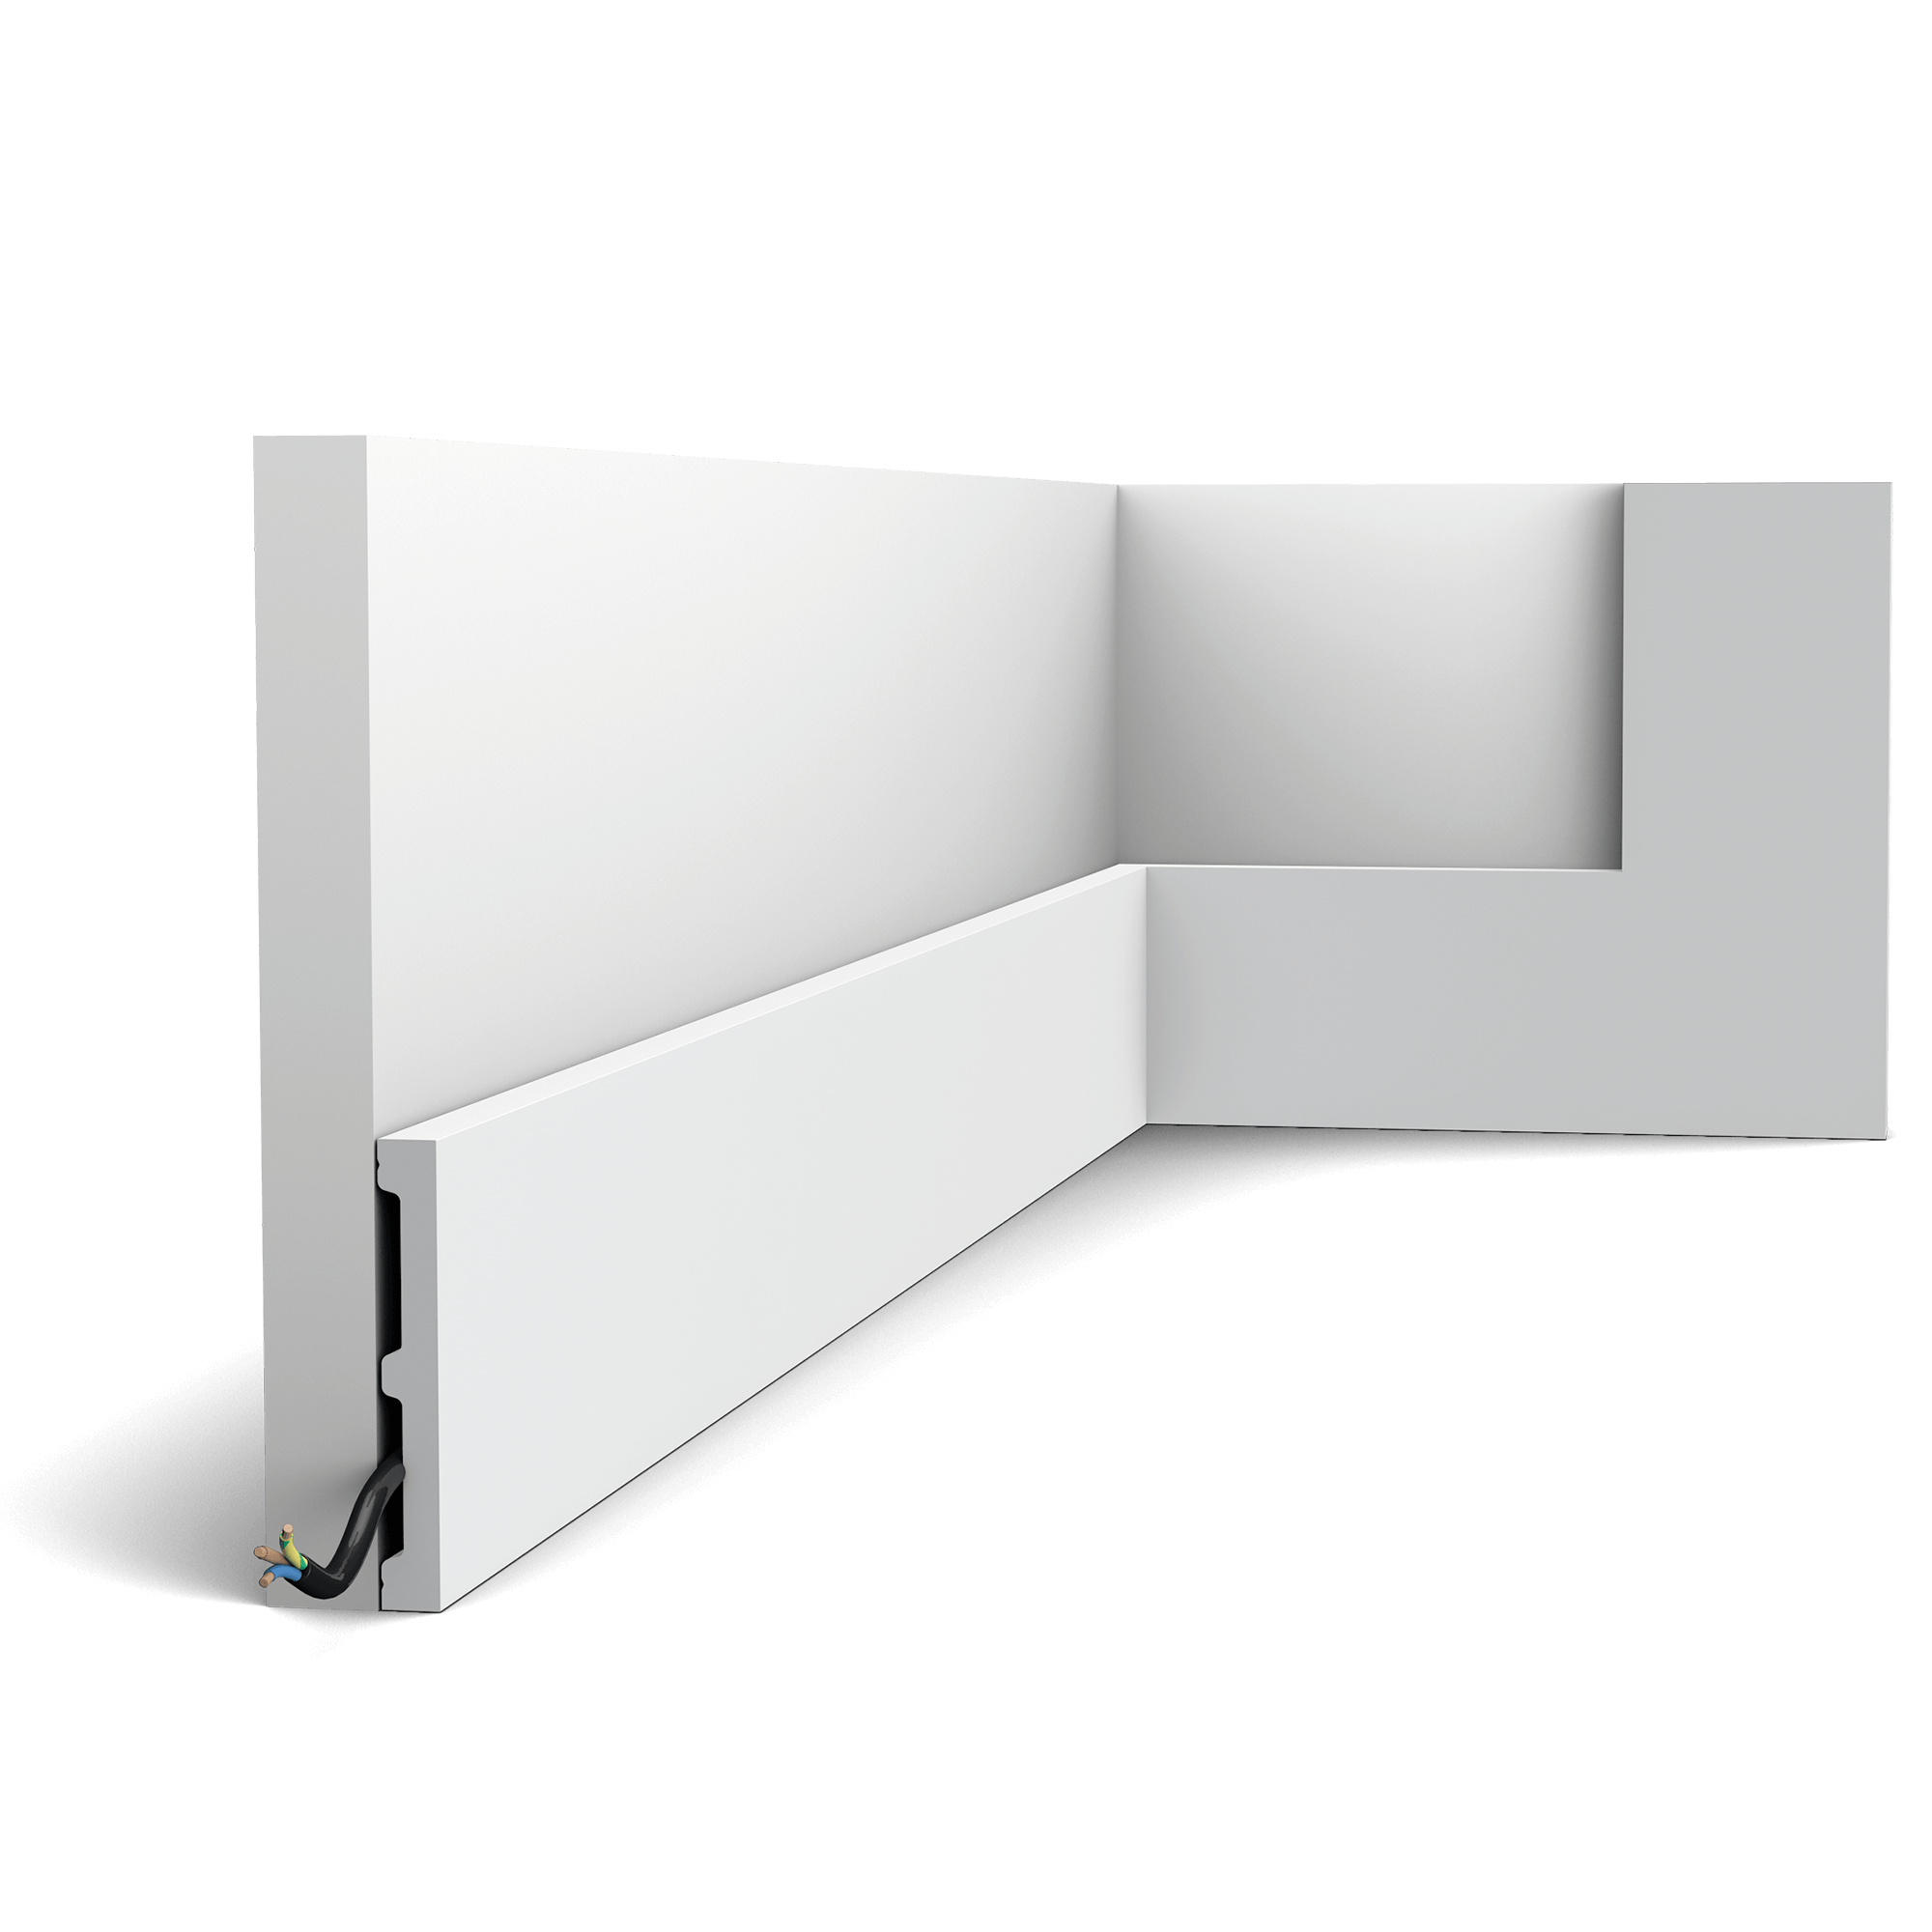 NEW - Product finished with RAL9003 Signal white. It is not necessary to repaint this profile after installation. This large, simple skirting board is part of the SQUARE family. Use this multifunctional profile to fit your entire home with the same skirting board. All you need to do is select the correct size to fit your space.